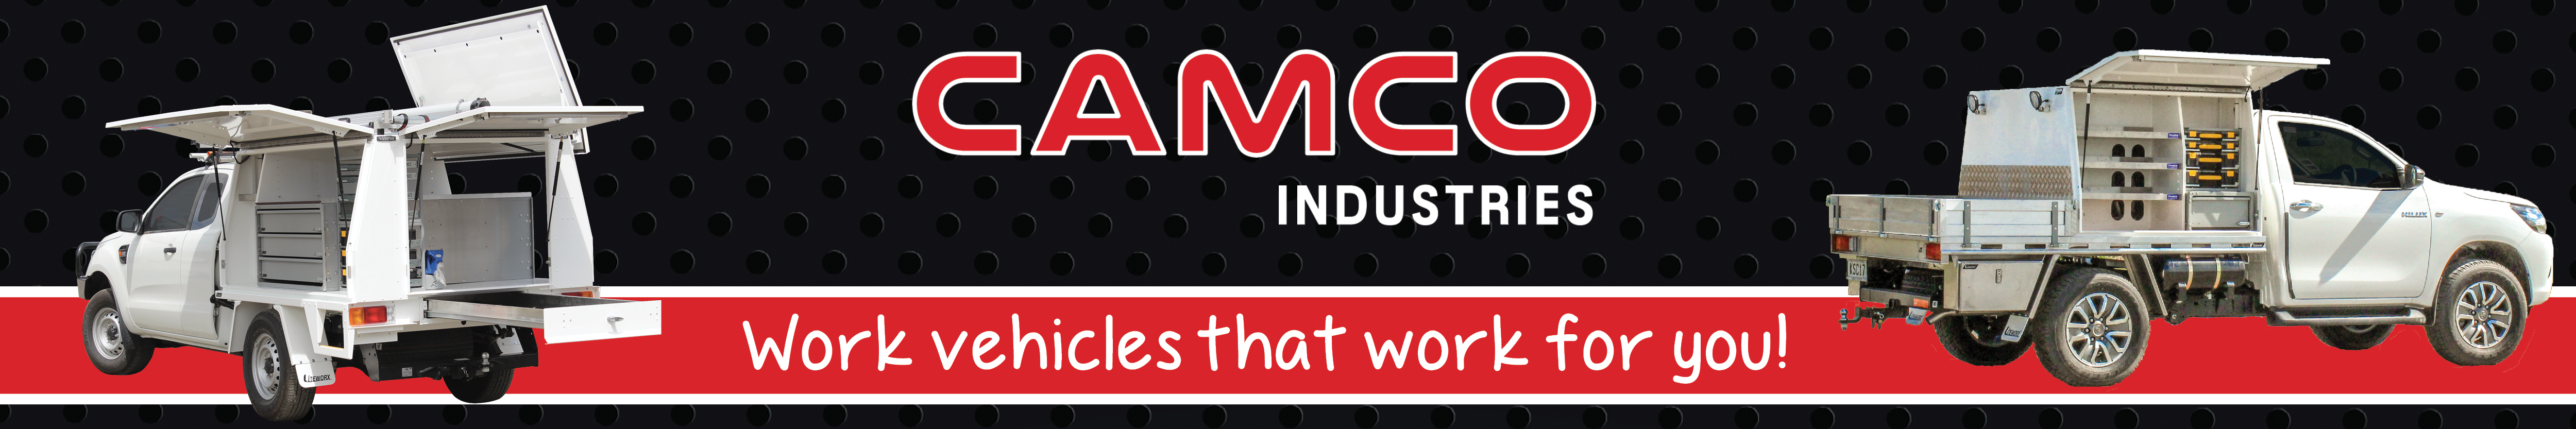 Camco Banner